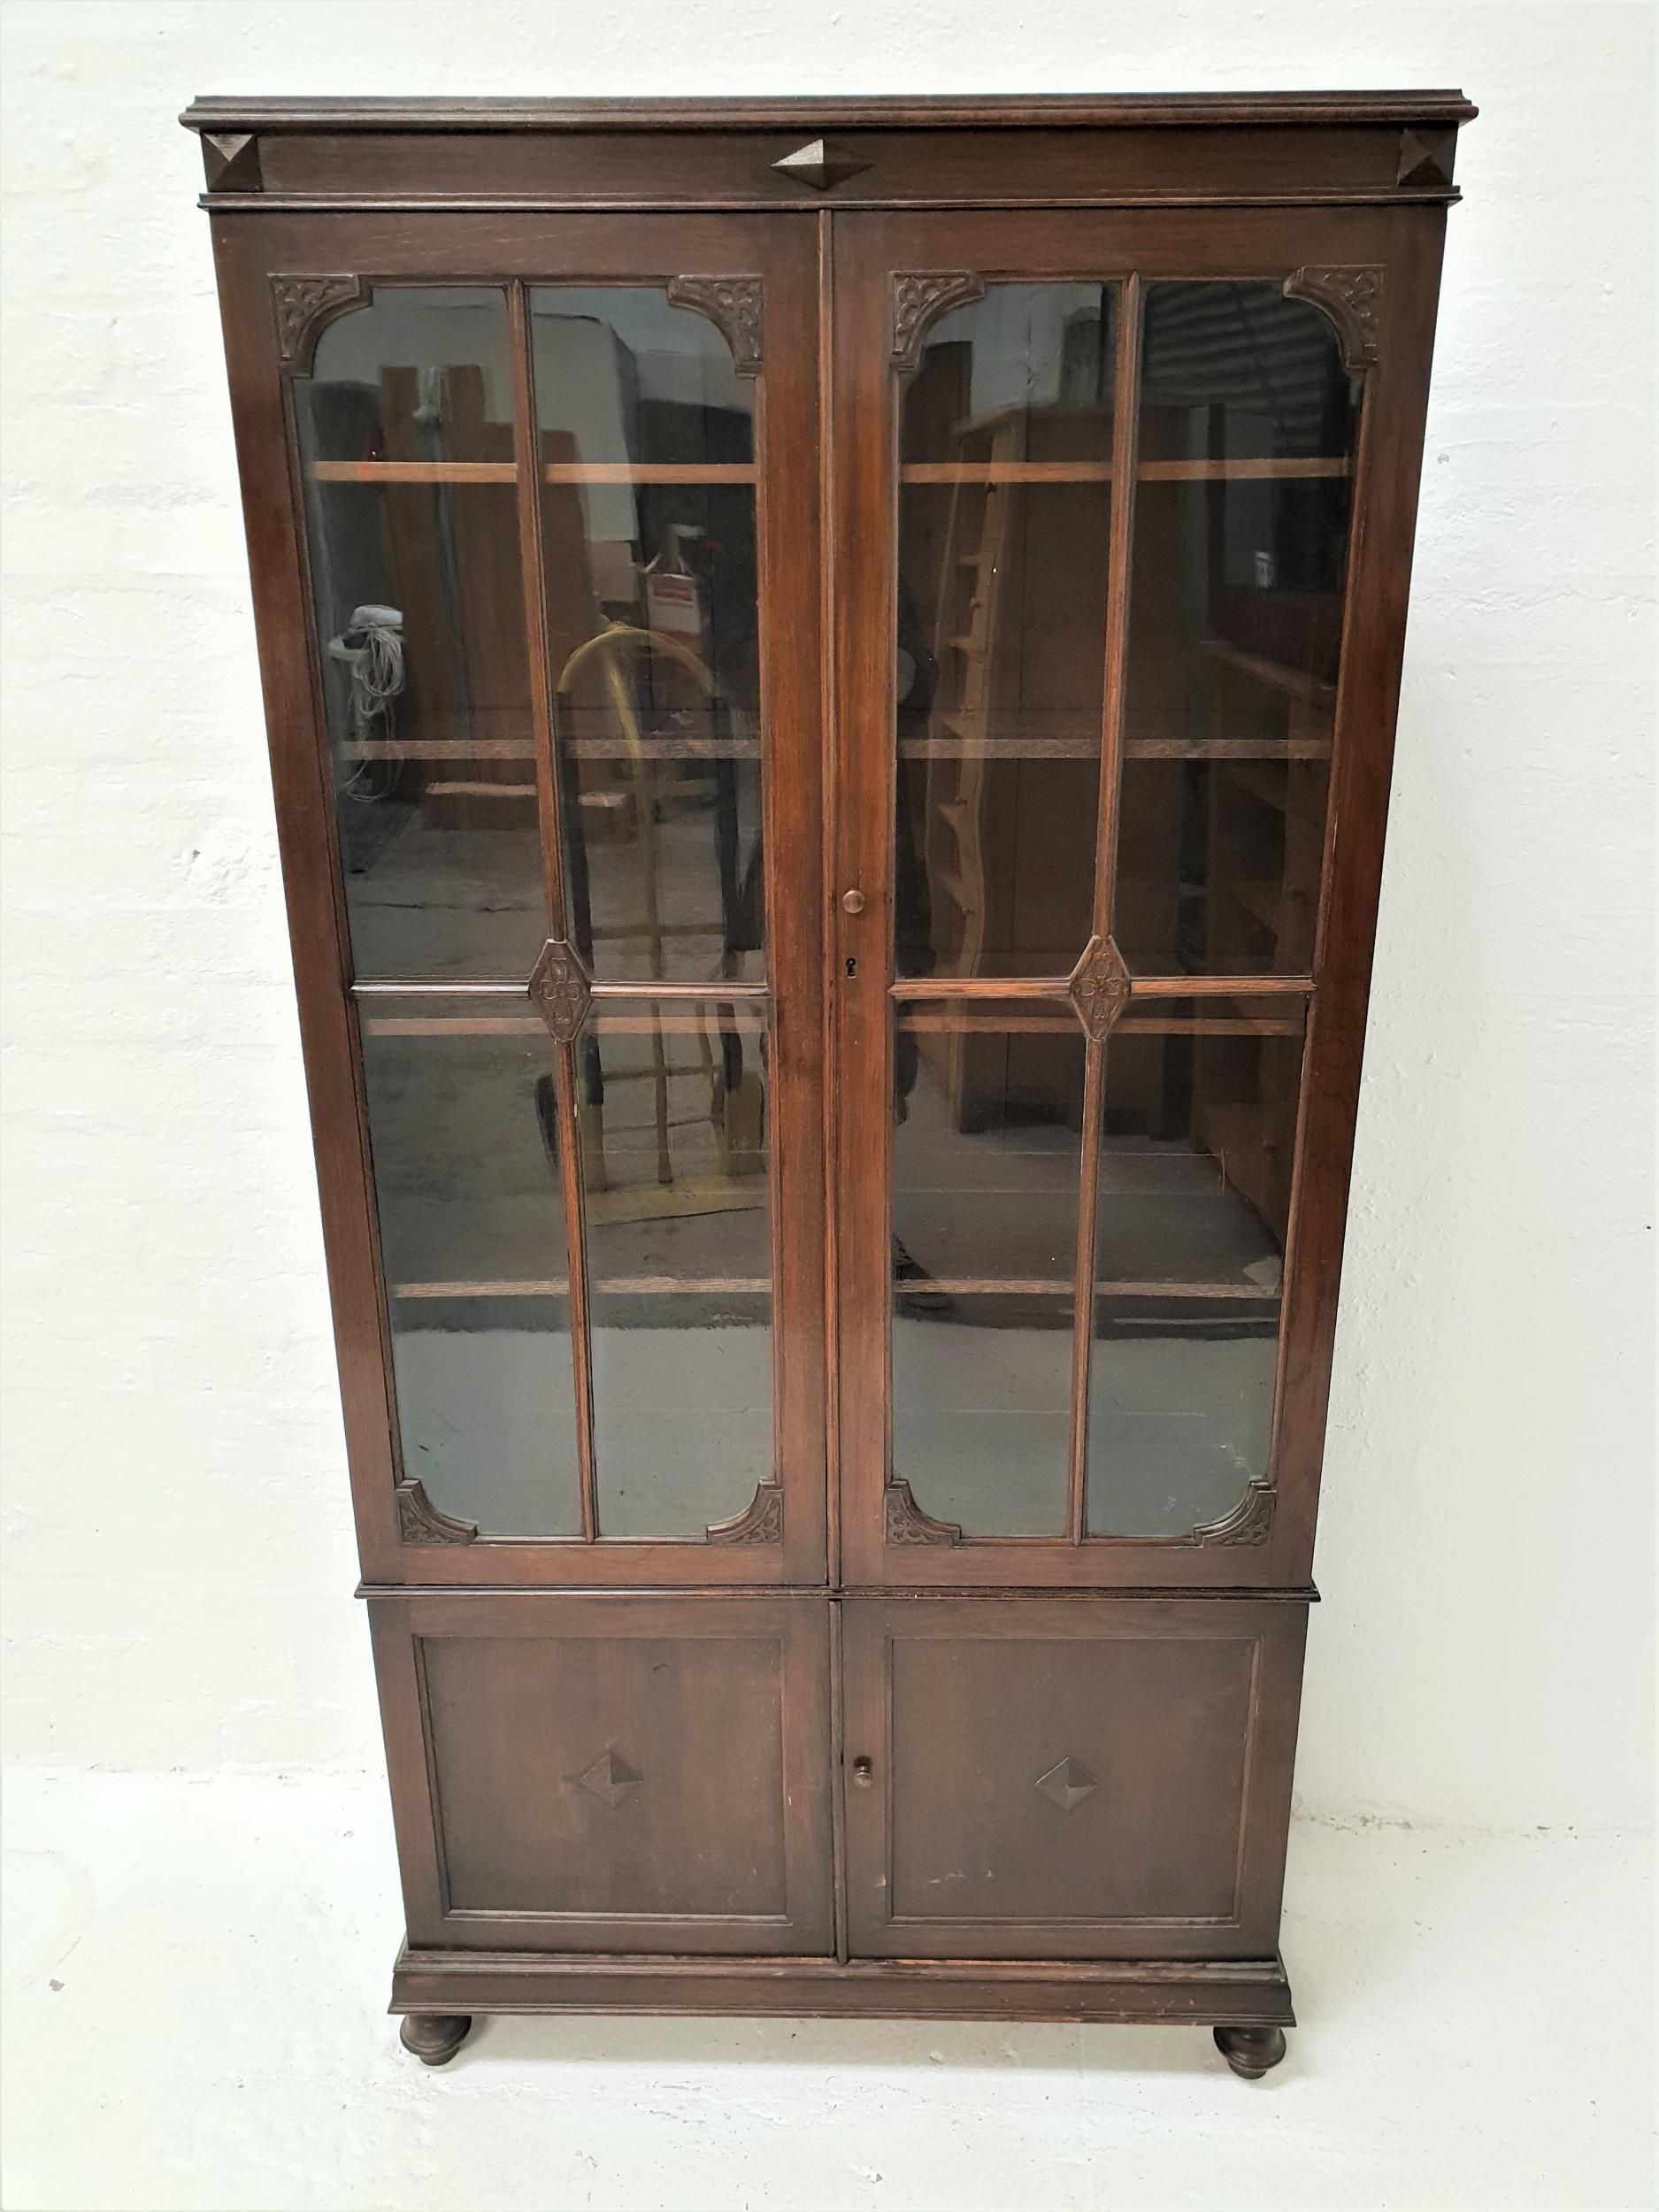 TALL OAK CABINET with a moulded top above a pair of paneled glass doors opening to reveal adjustable